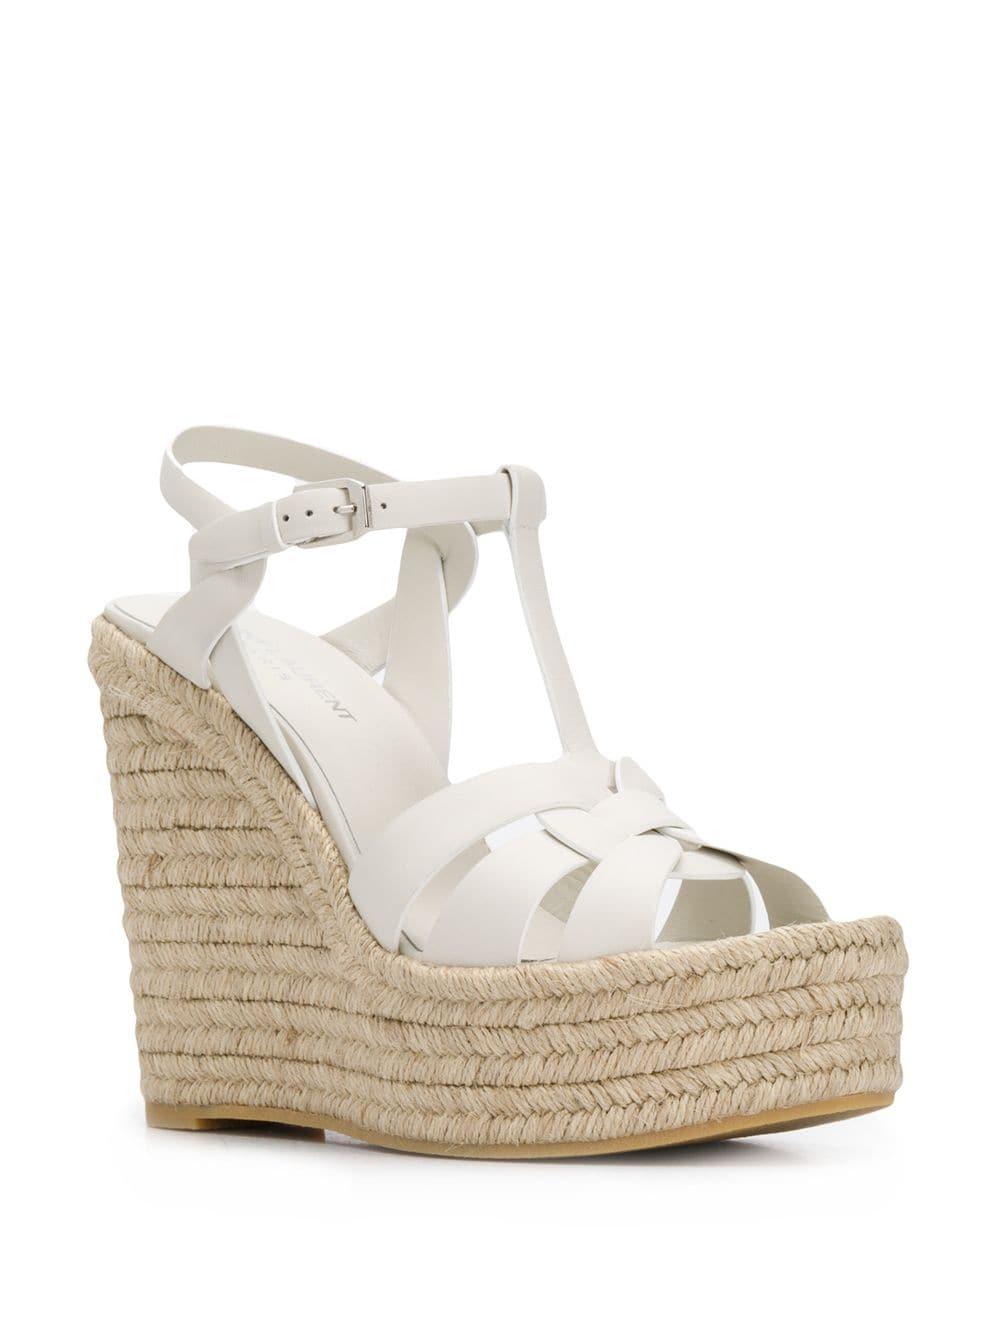 Saint Laurent Tribute Leather Espadrille Wedge Sandals in White 